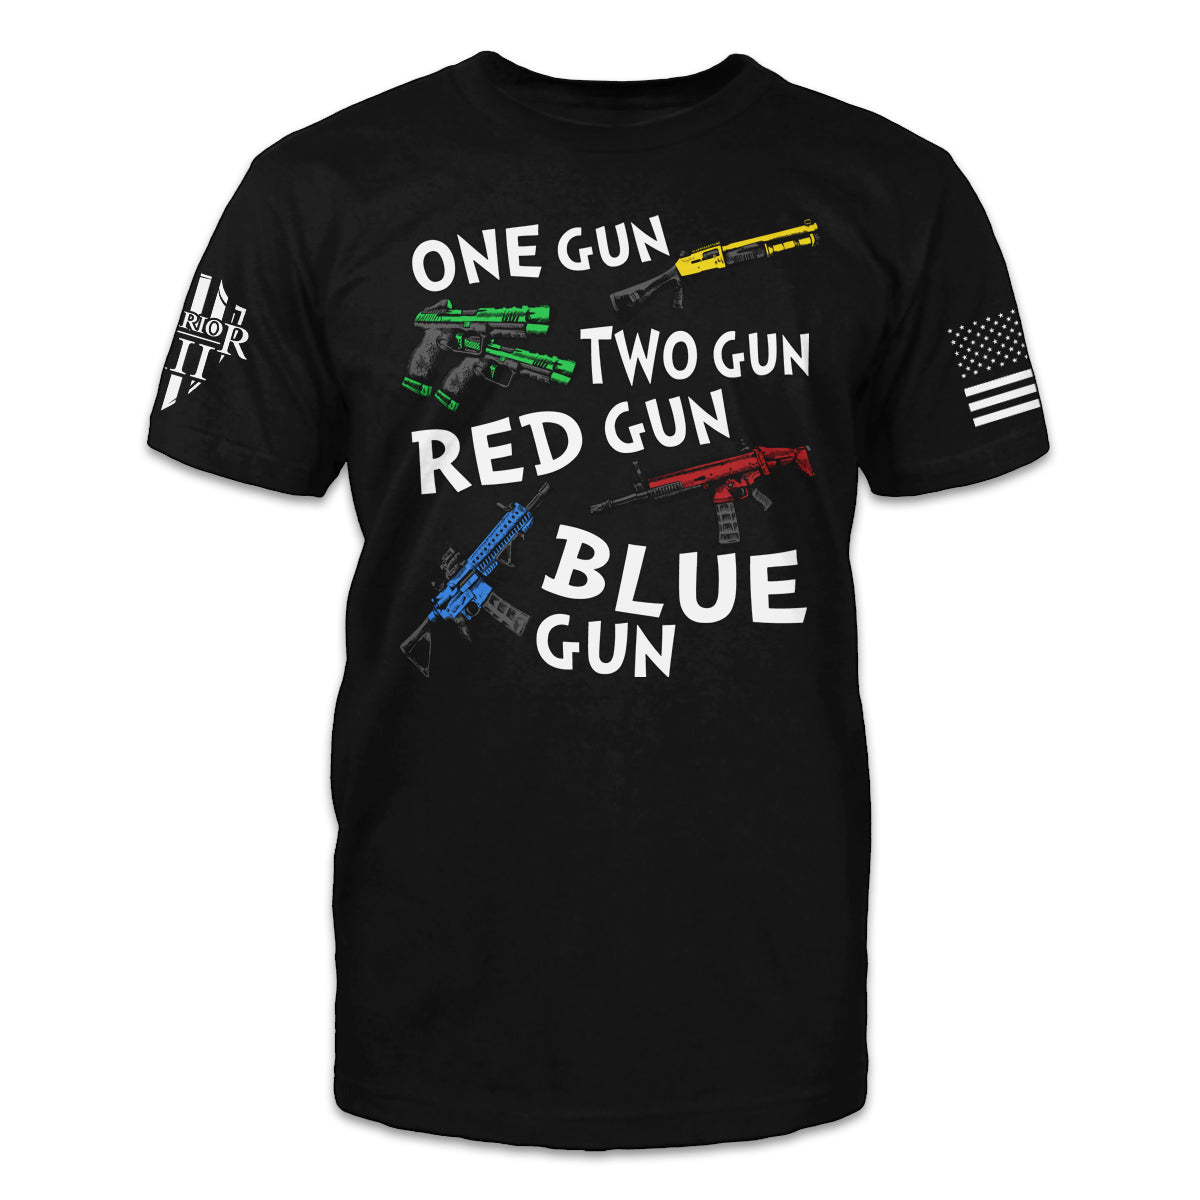 A black t-shirt with the words "One gun, two gun, red gun blue gun" with colored guns printed on the front.